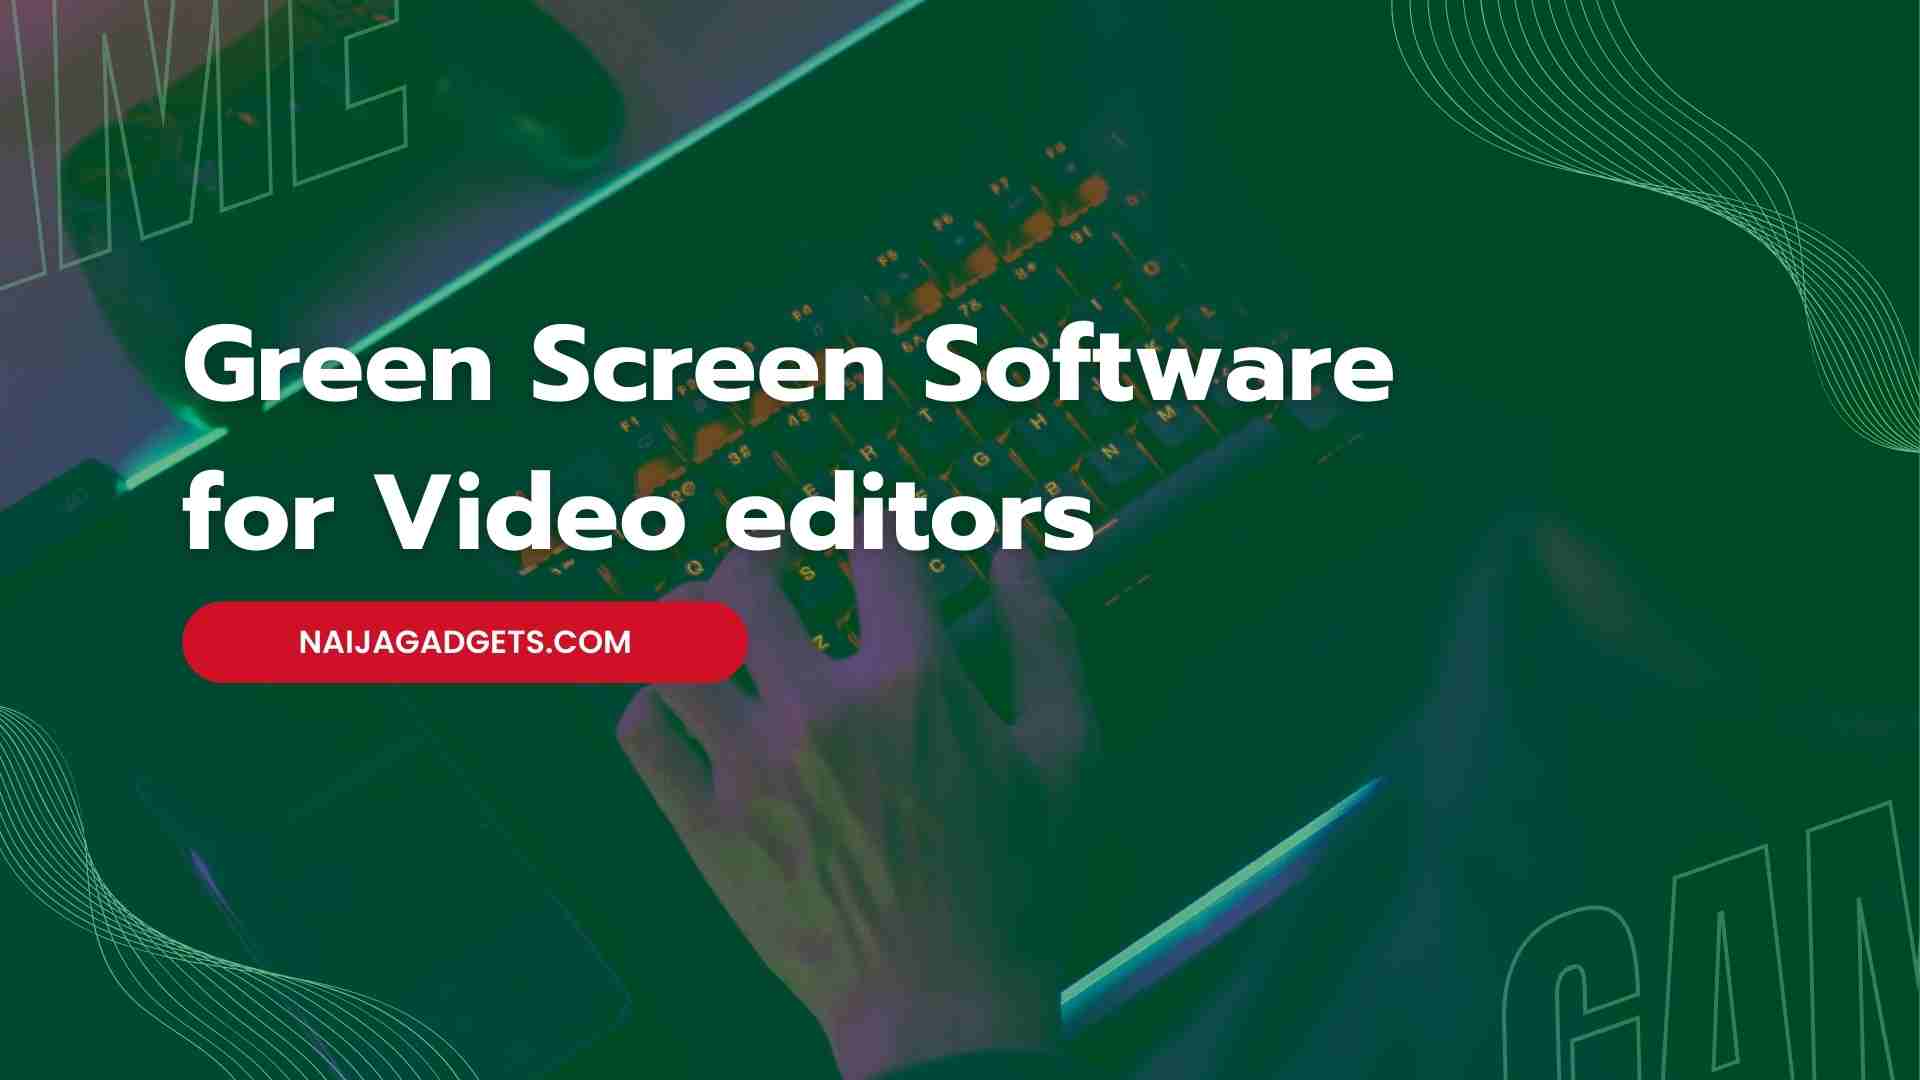 Image of 5 Green Screen Software for Video editors